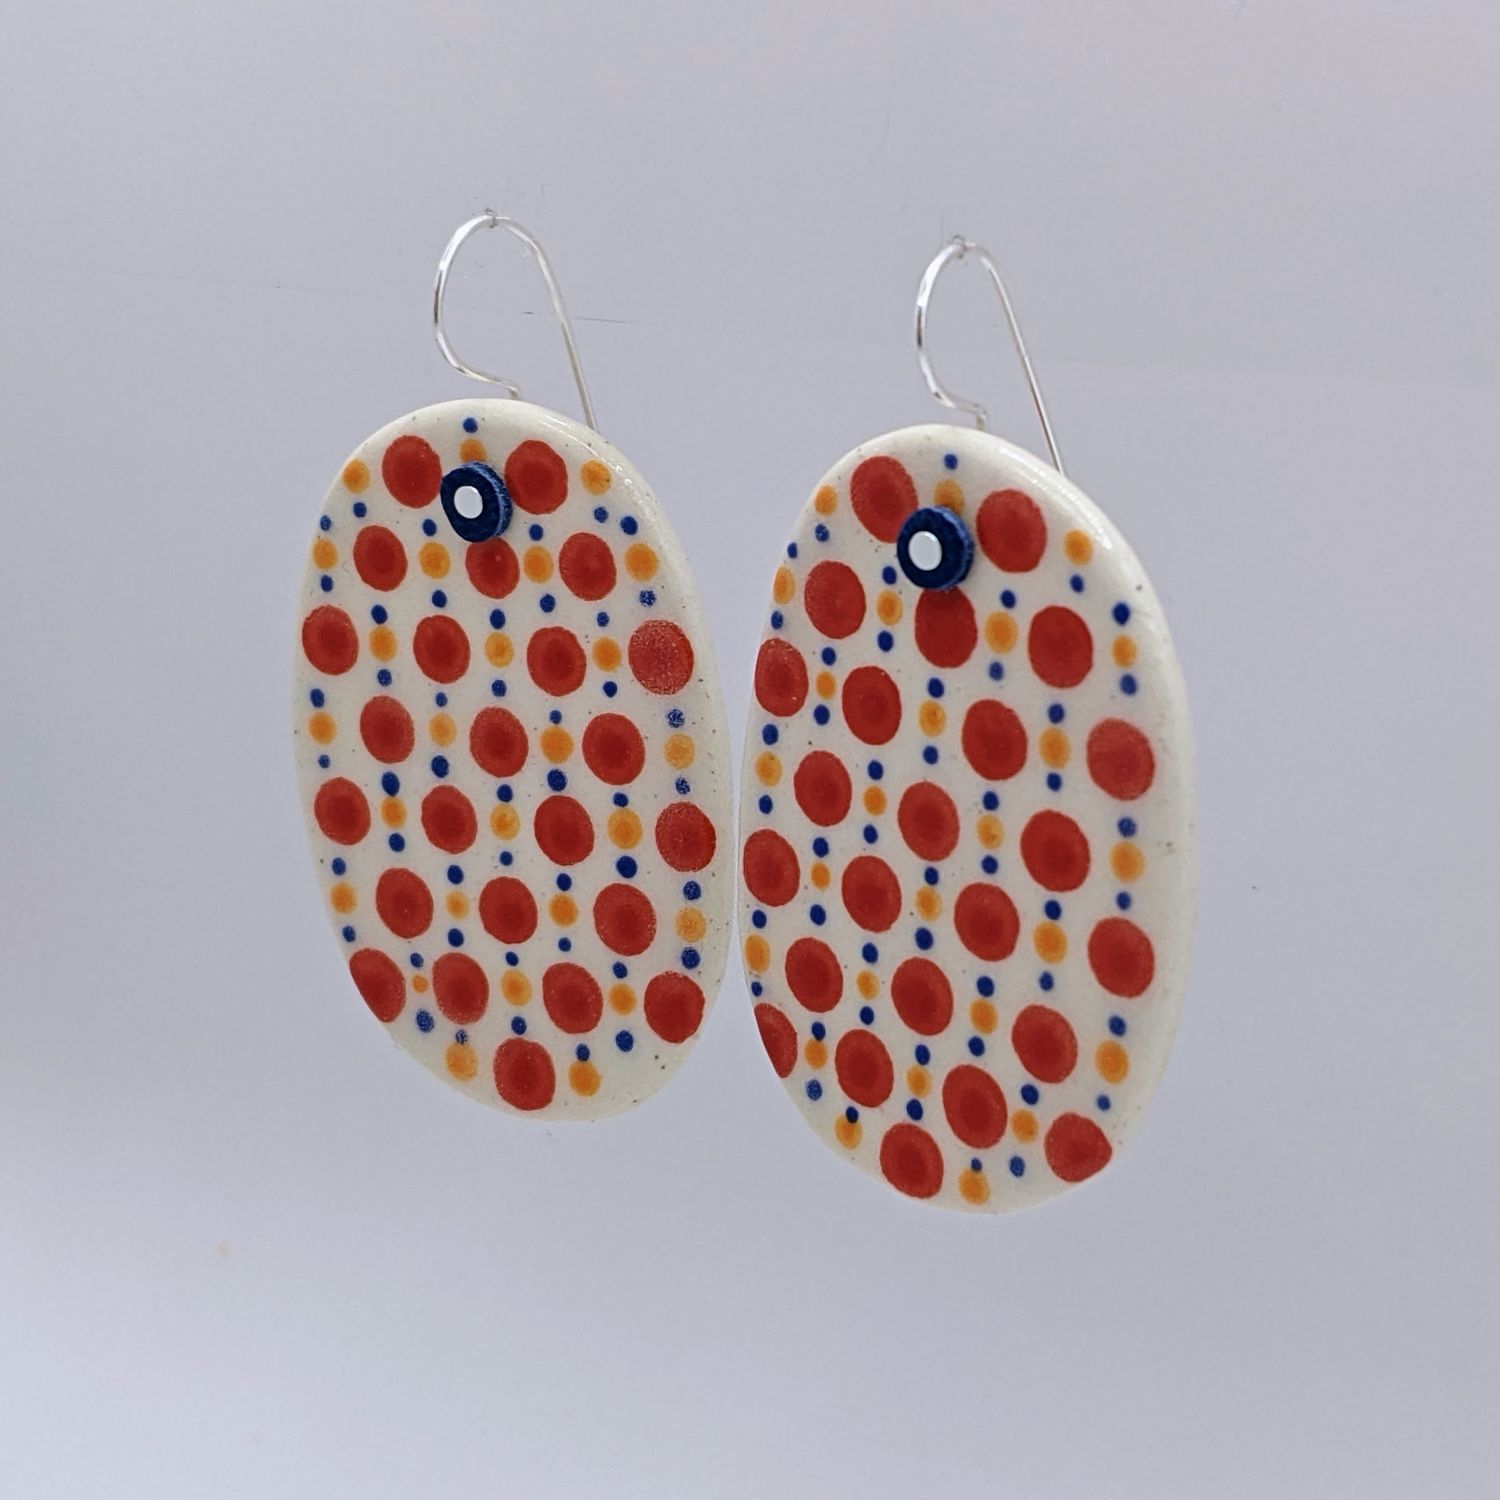 Here and Here: Red Dotted Ceramic Disc Earrings Product Image 3 of 3